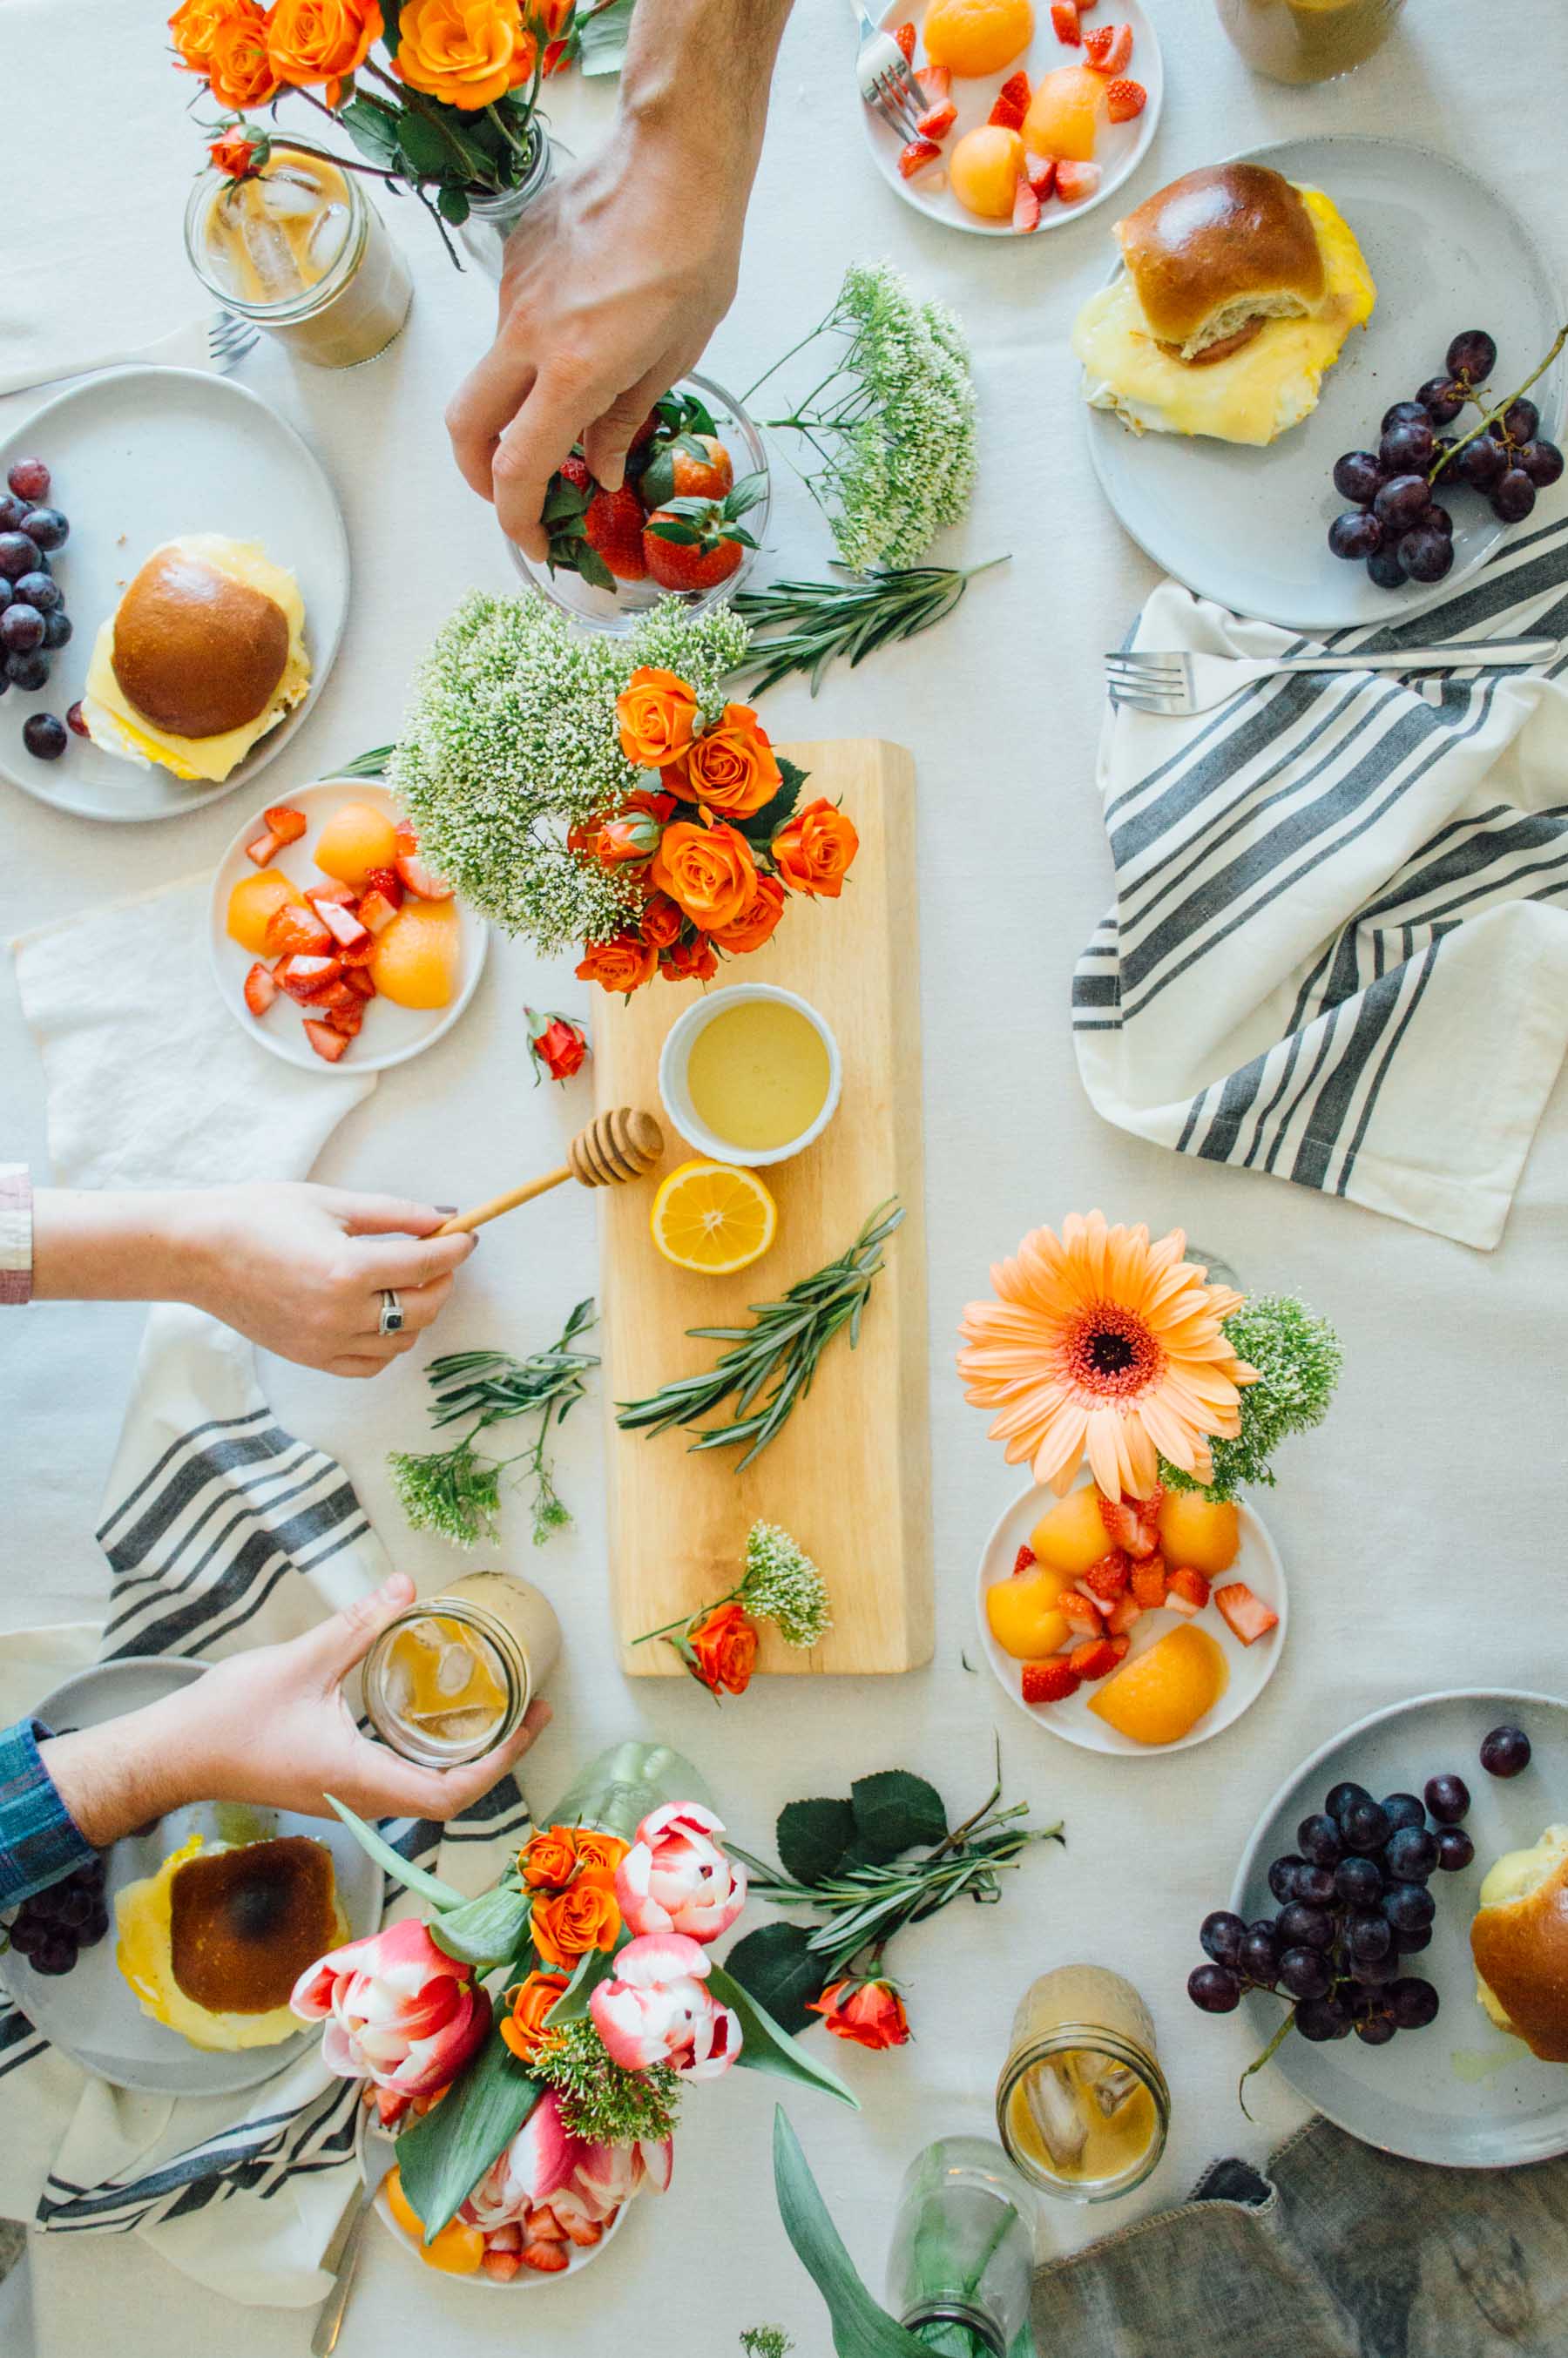 How to throw your own Floral Spring Brunch this season and prep in under an hour. | bygabriella.co